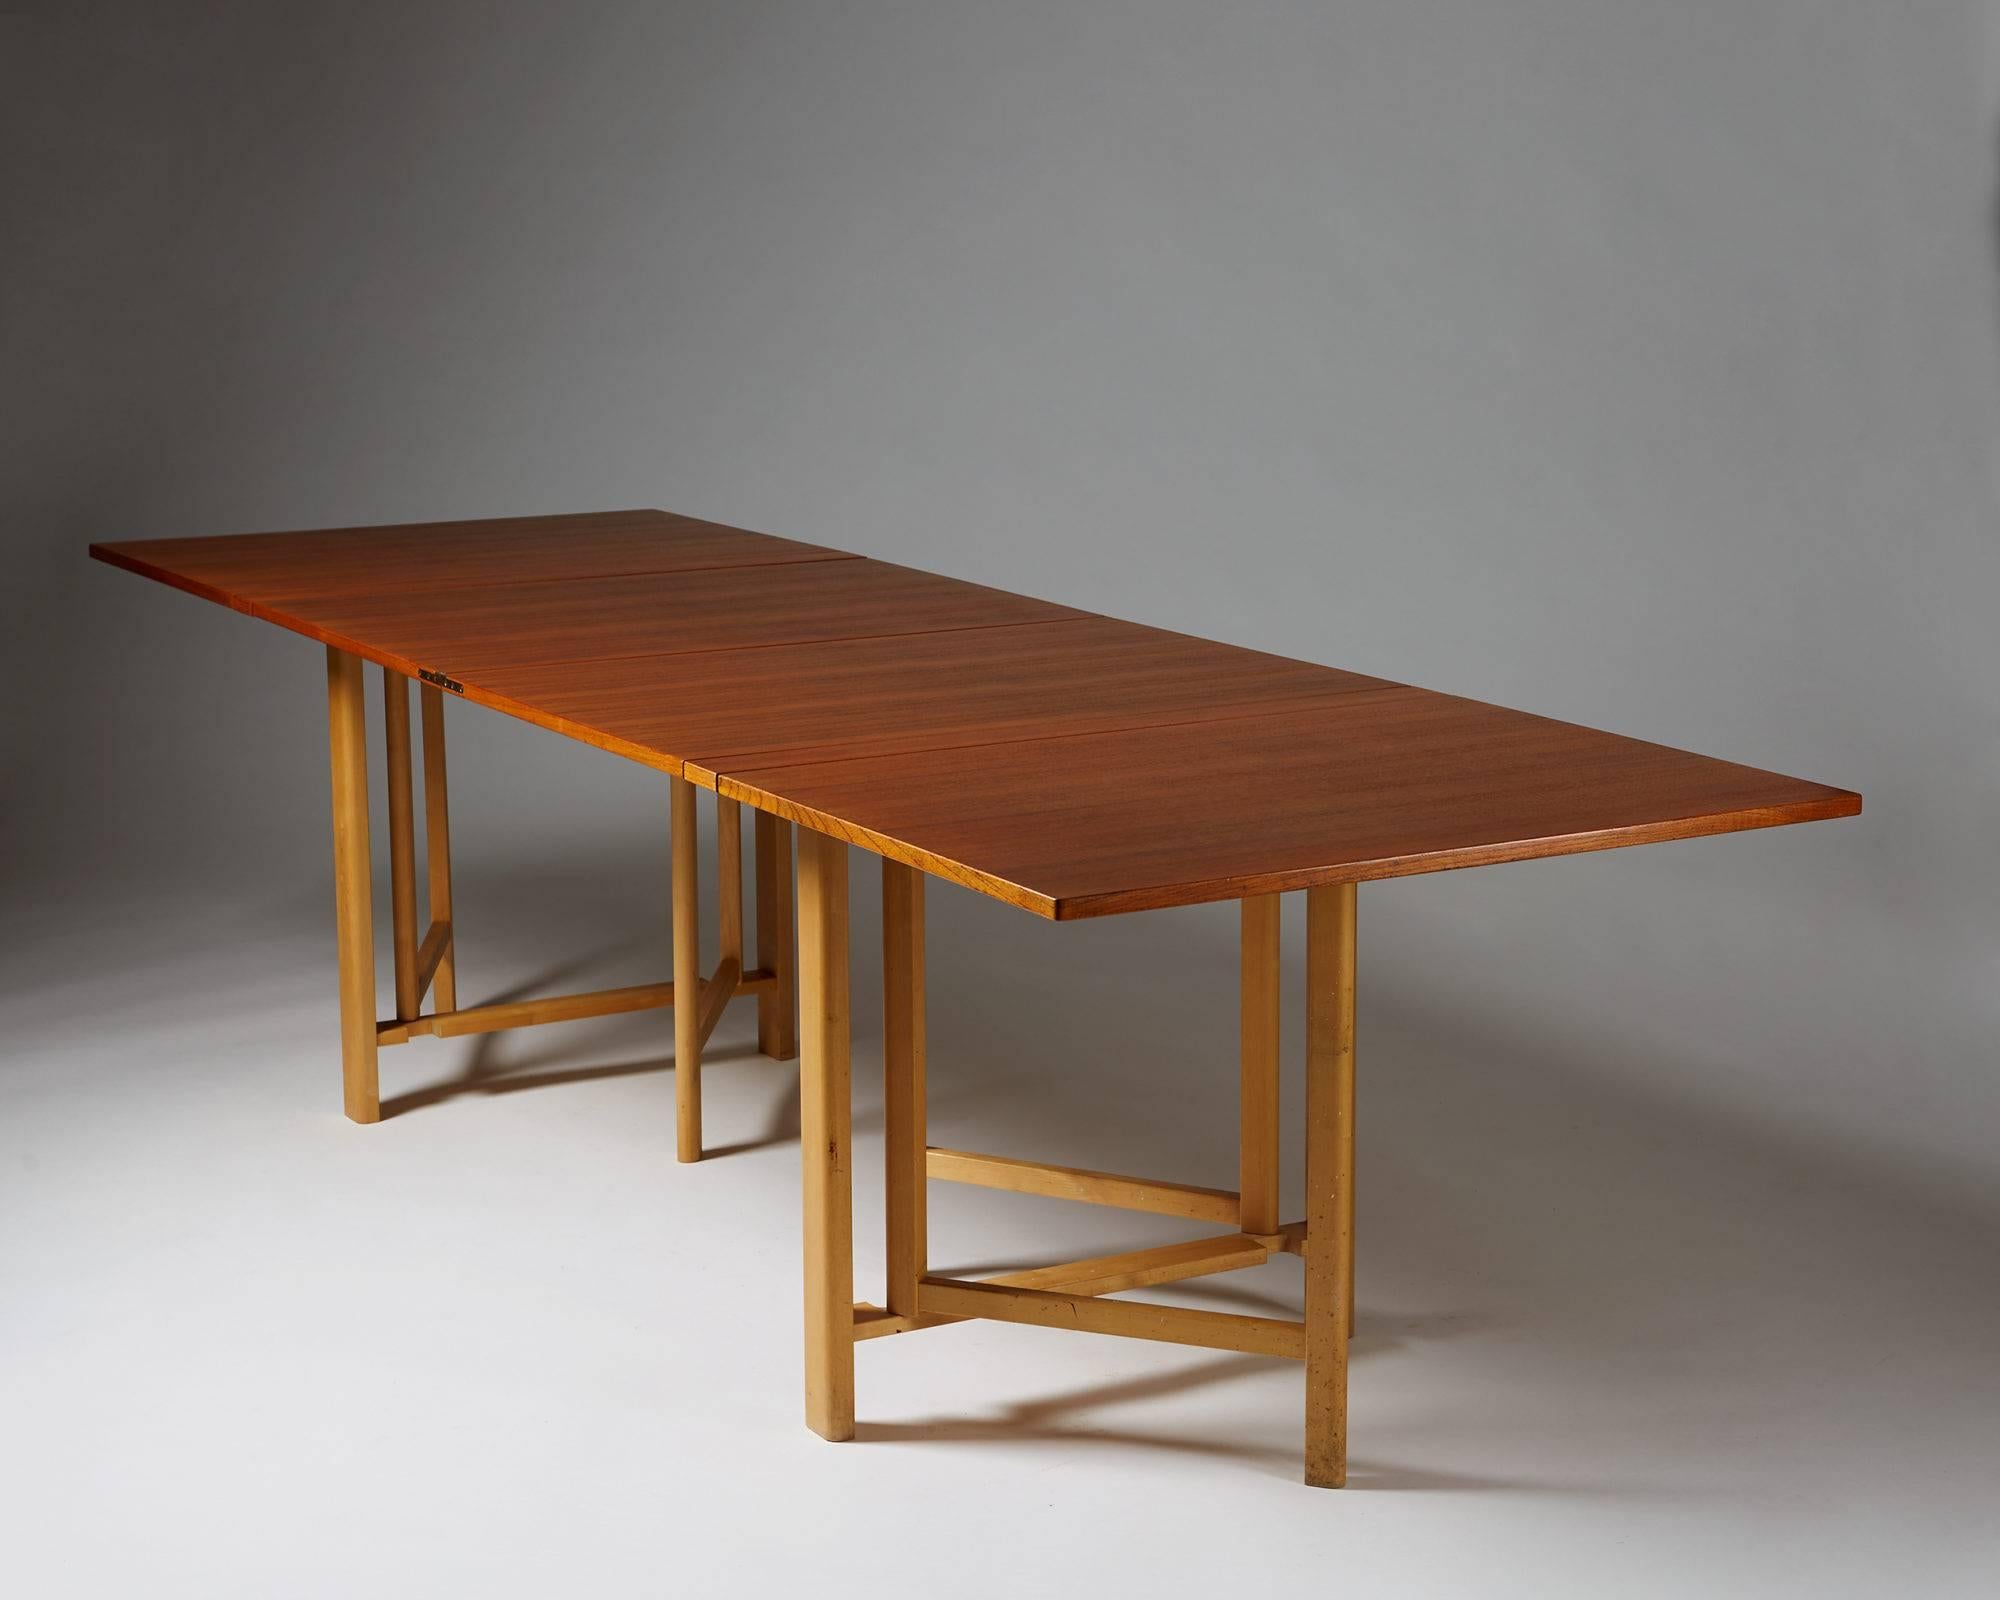 Dining table “Maria Flap” designed by Bruno Mathsson for Mathsson International, Sweden, 1965.
Teak top with beech legs.

Measure: H 72 cm/ 2' 4 1/2